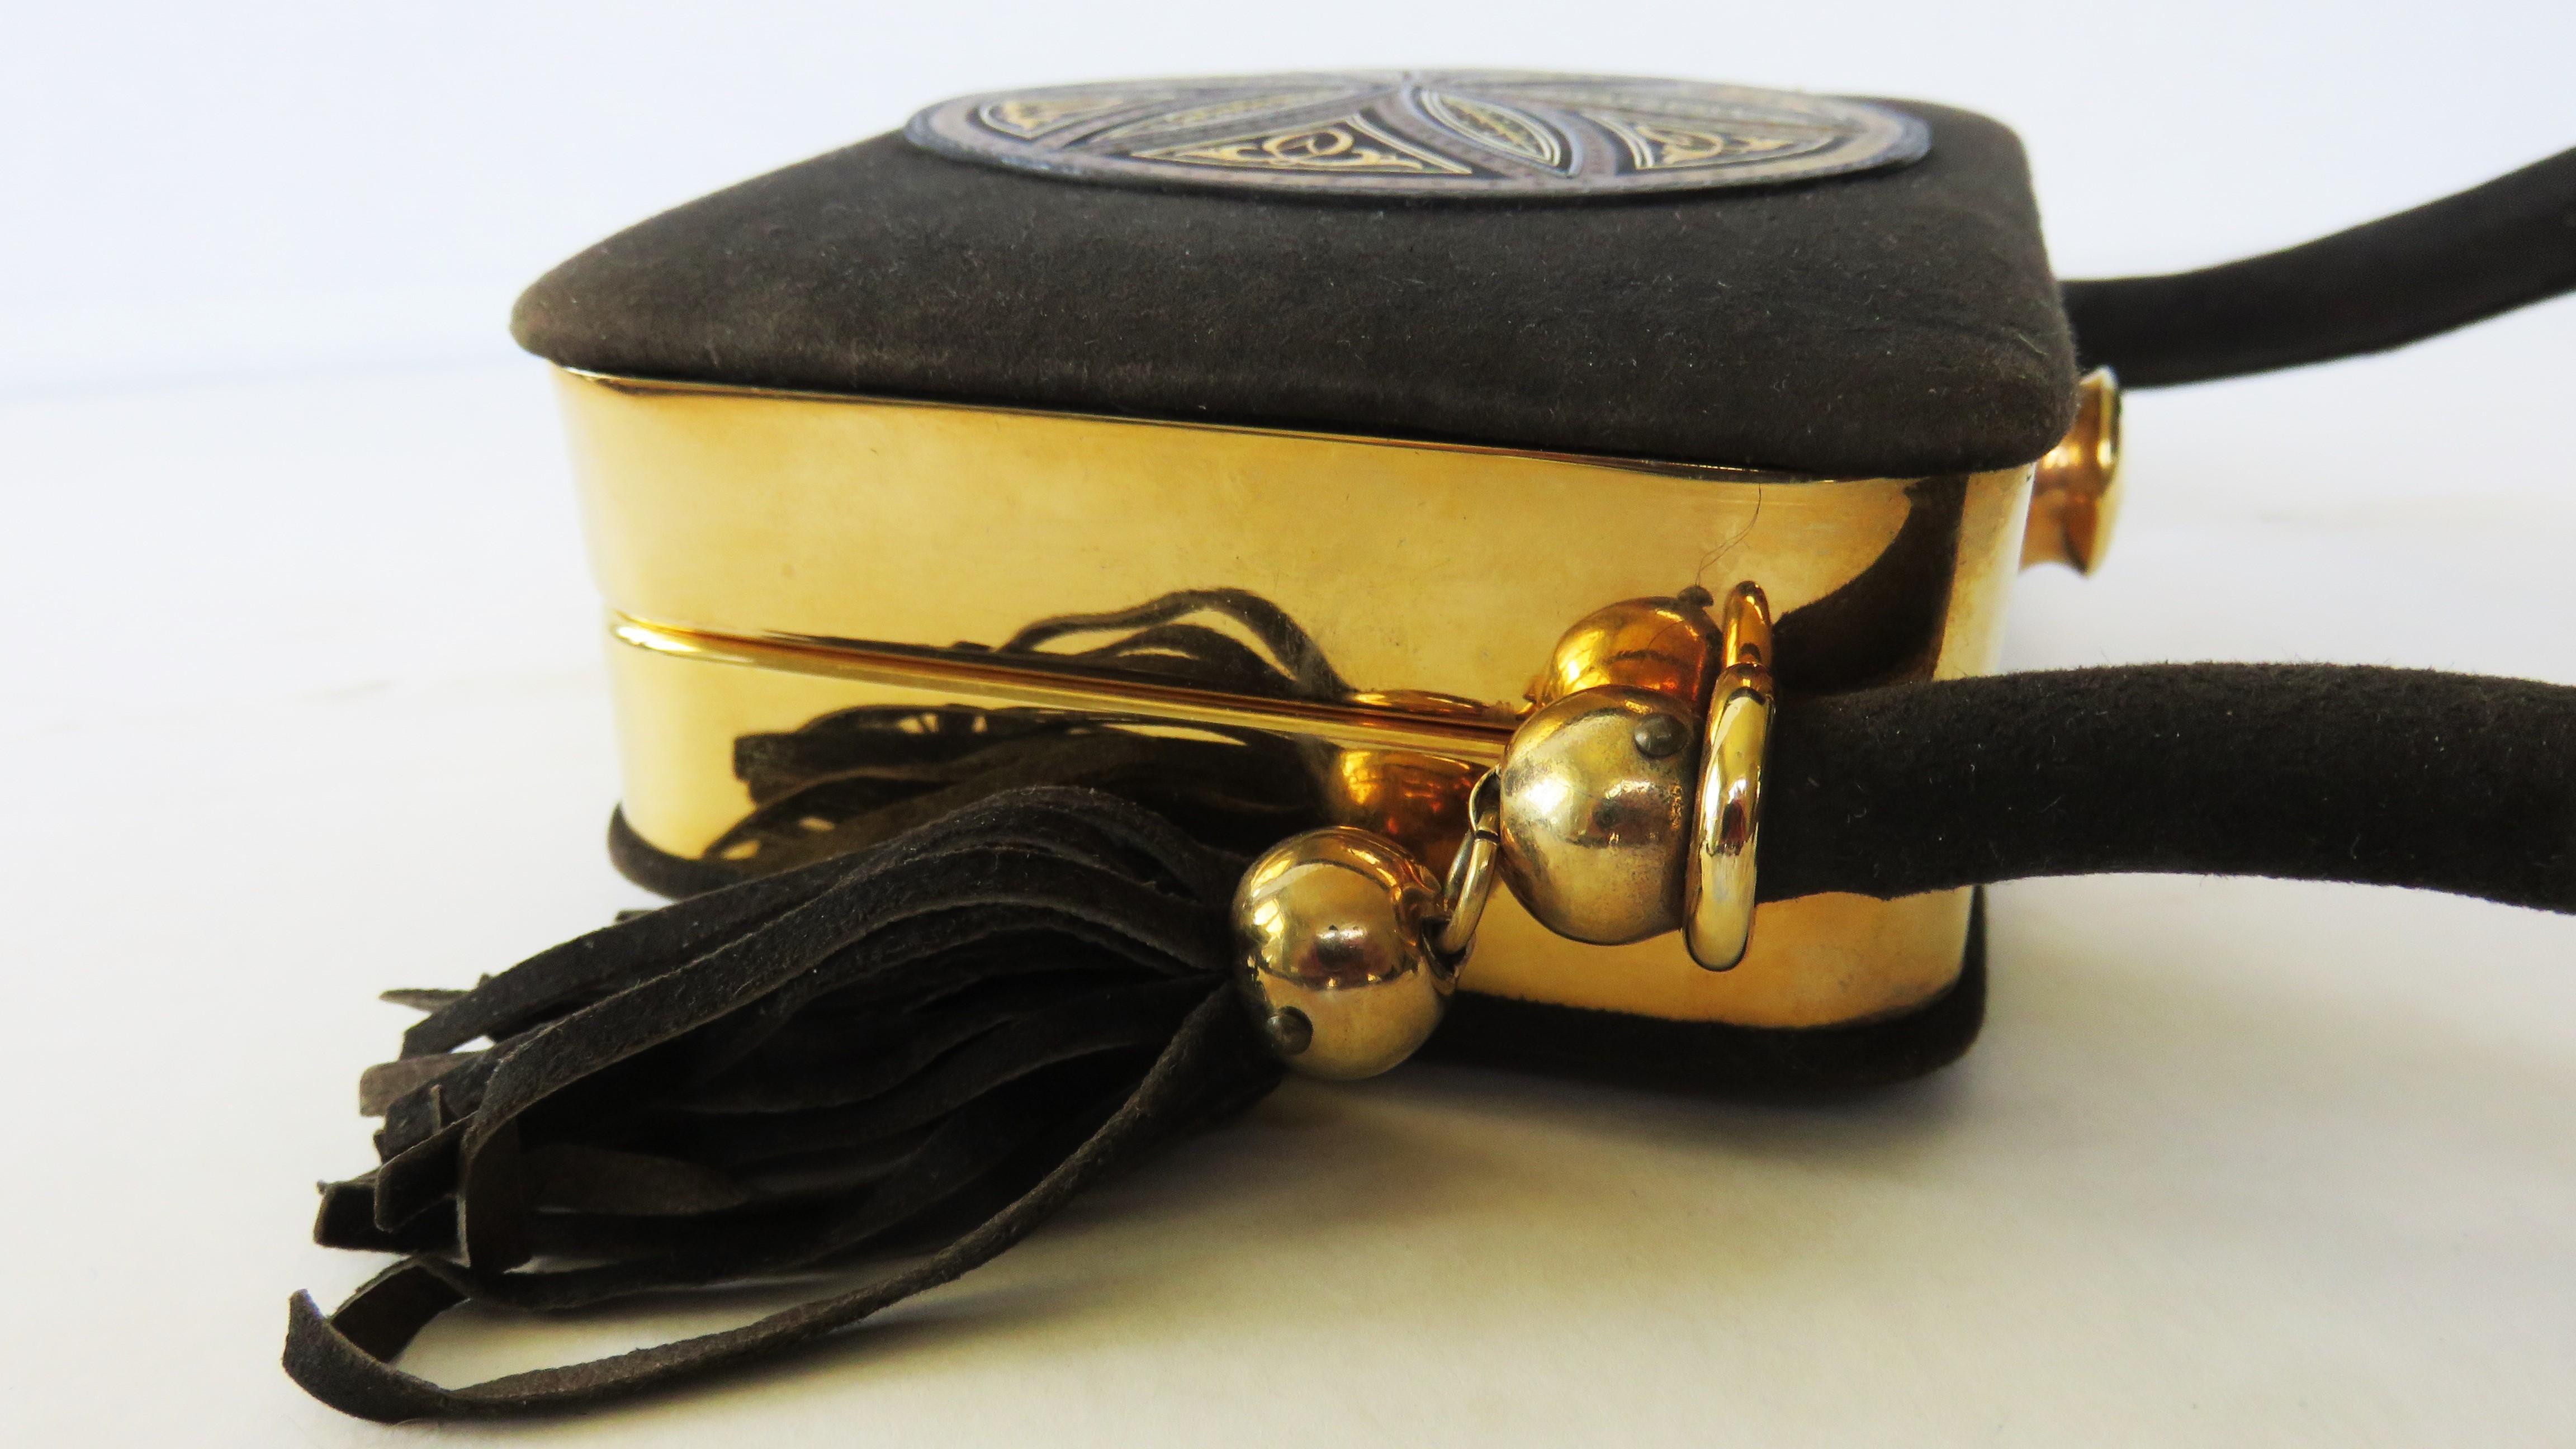  1950s Suede Minaudiere Compact Evening Bag with Medallion Front For Sale 5